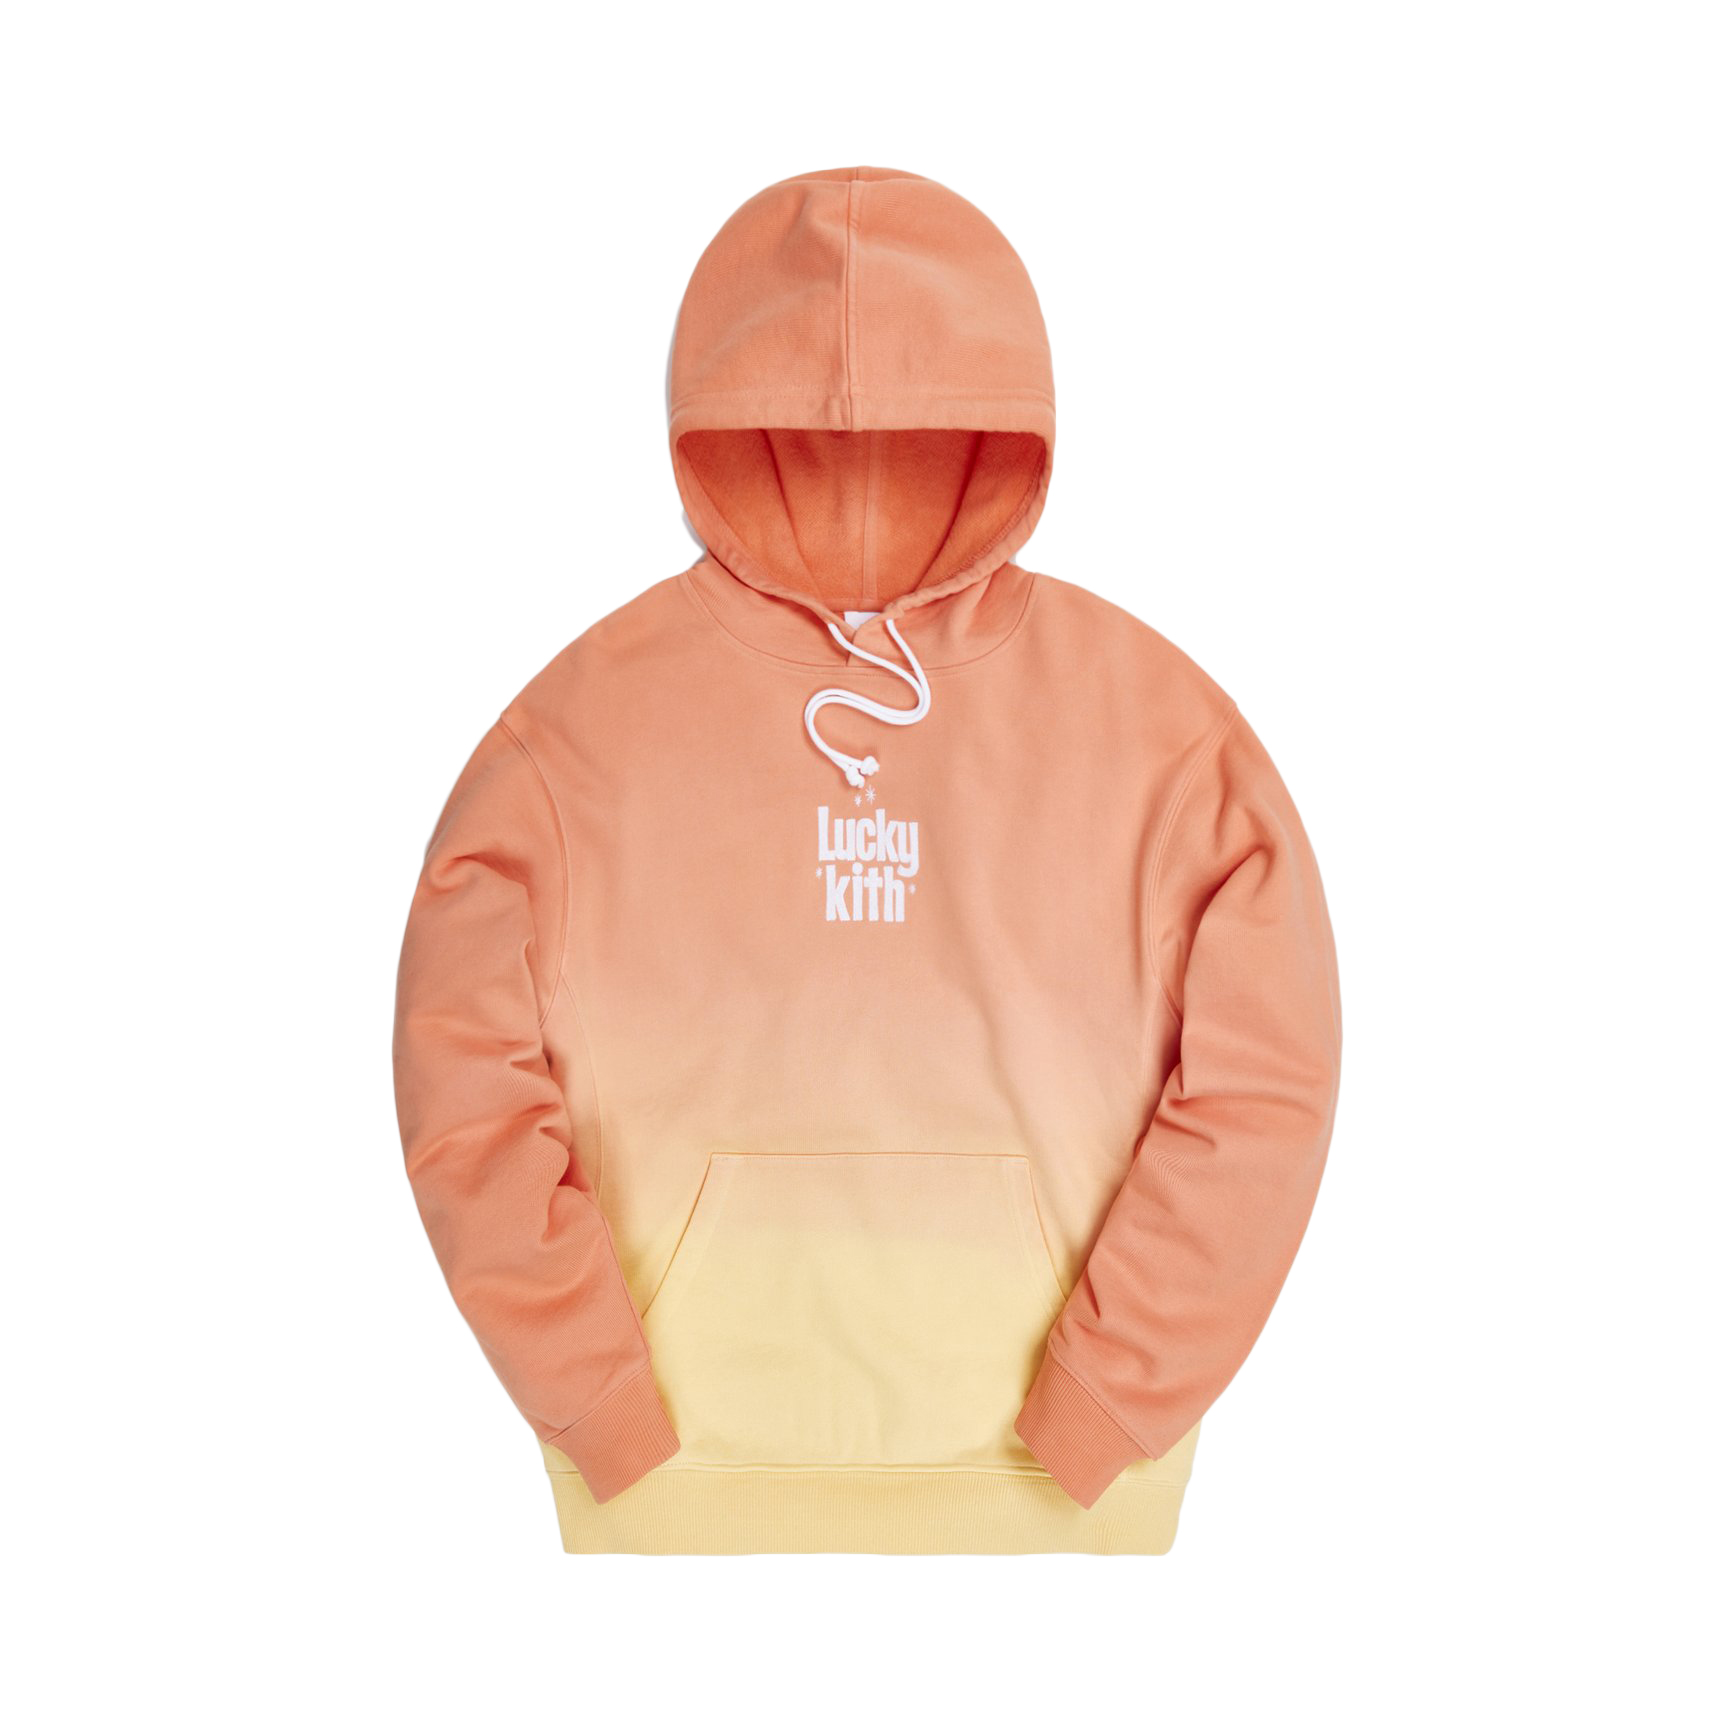 Pre-Owned & Vintage KITH Hoodies for Men | ModeSens